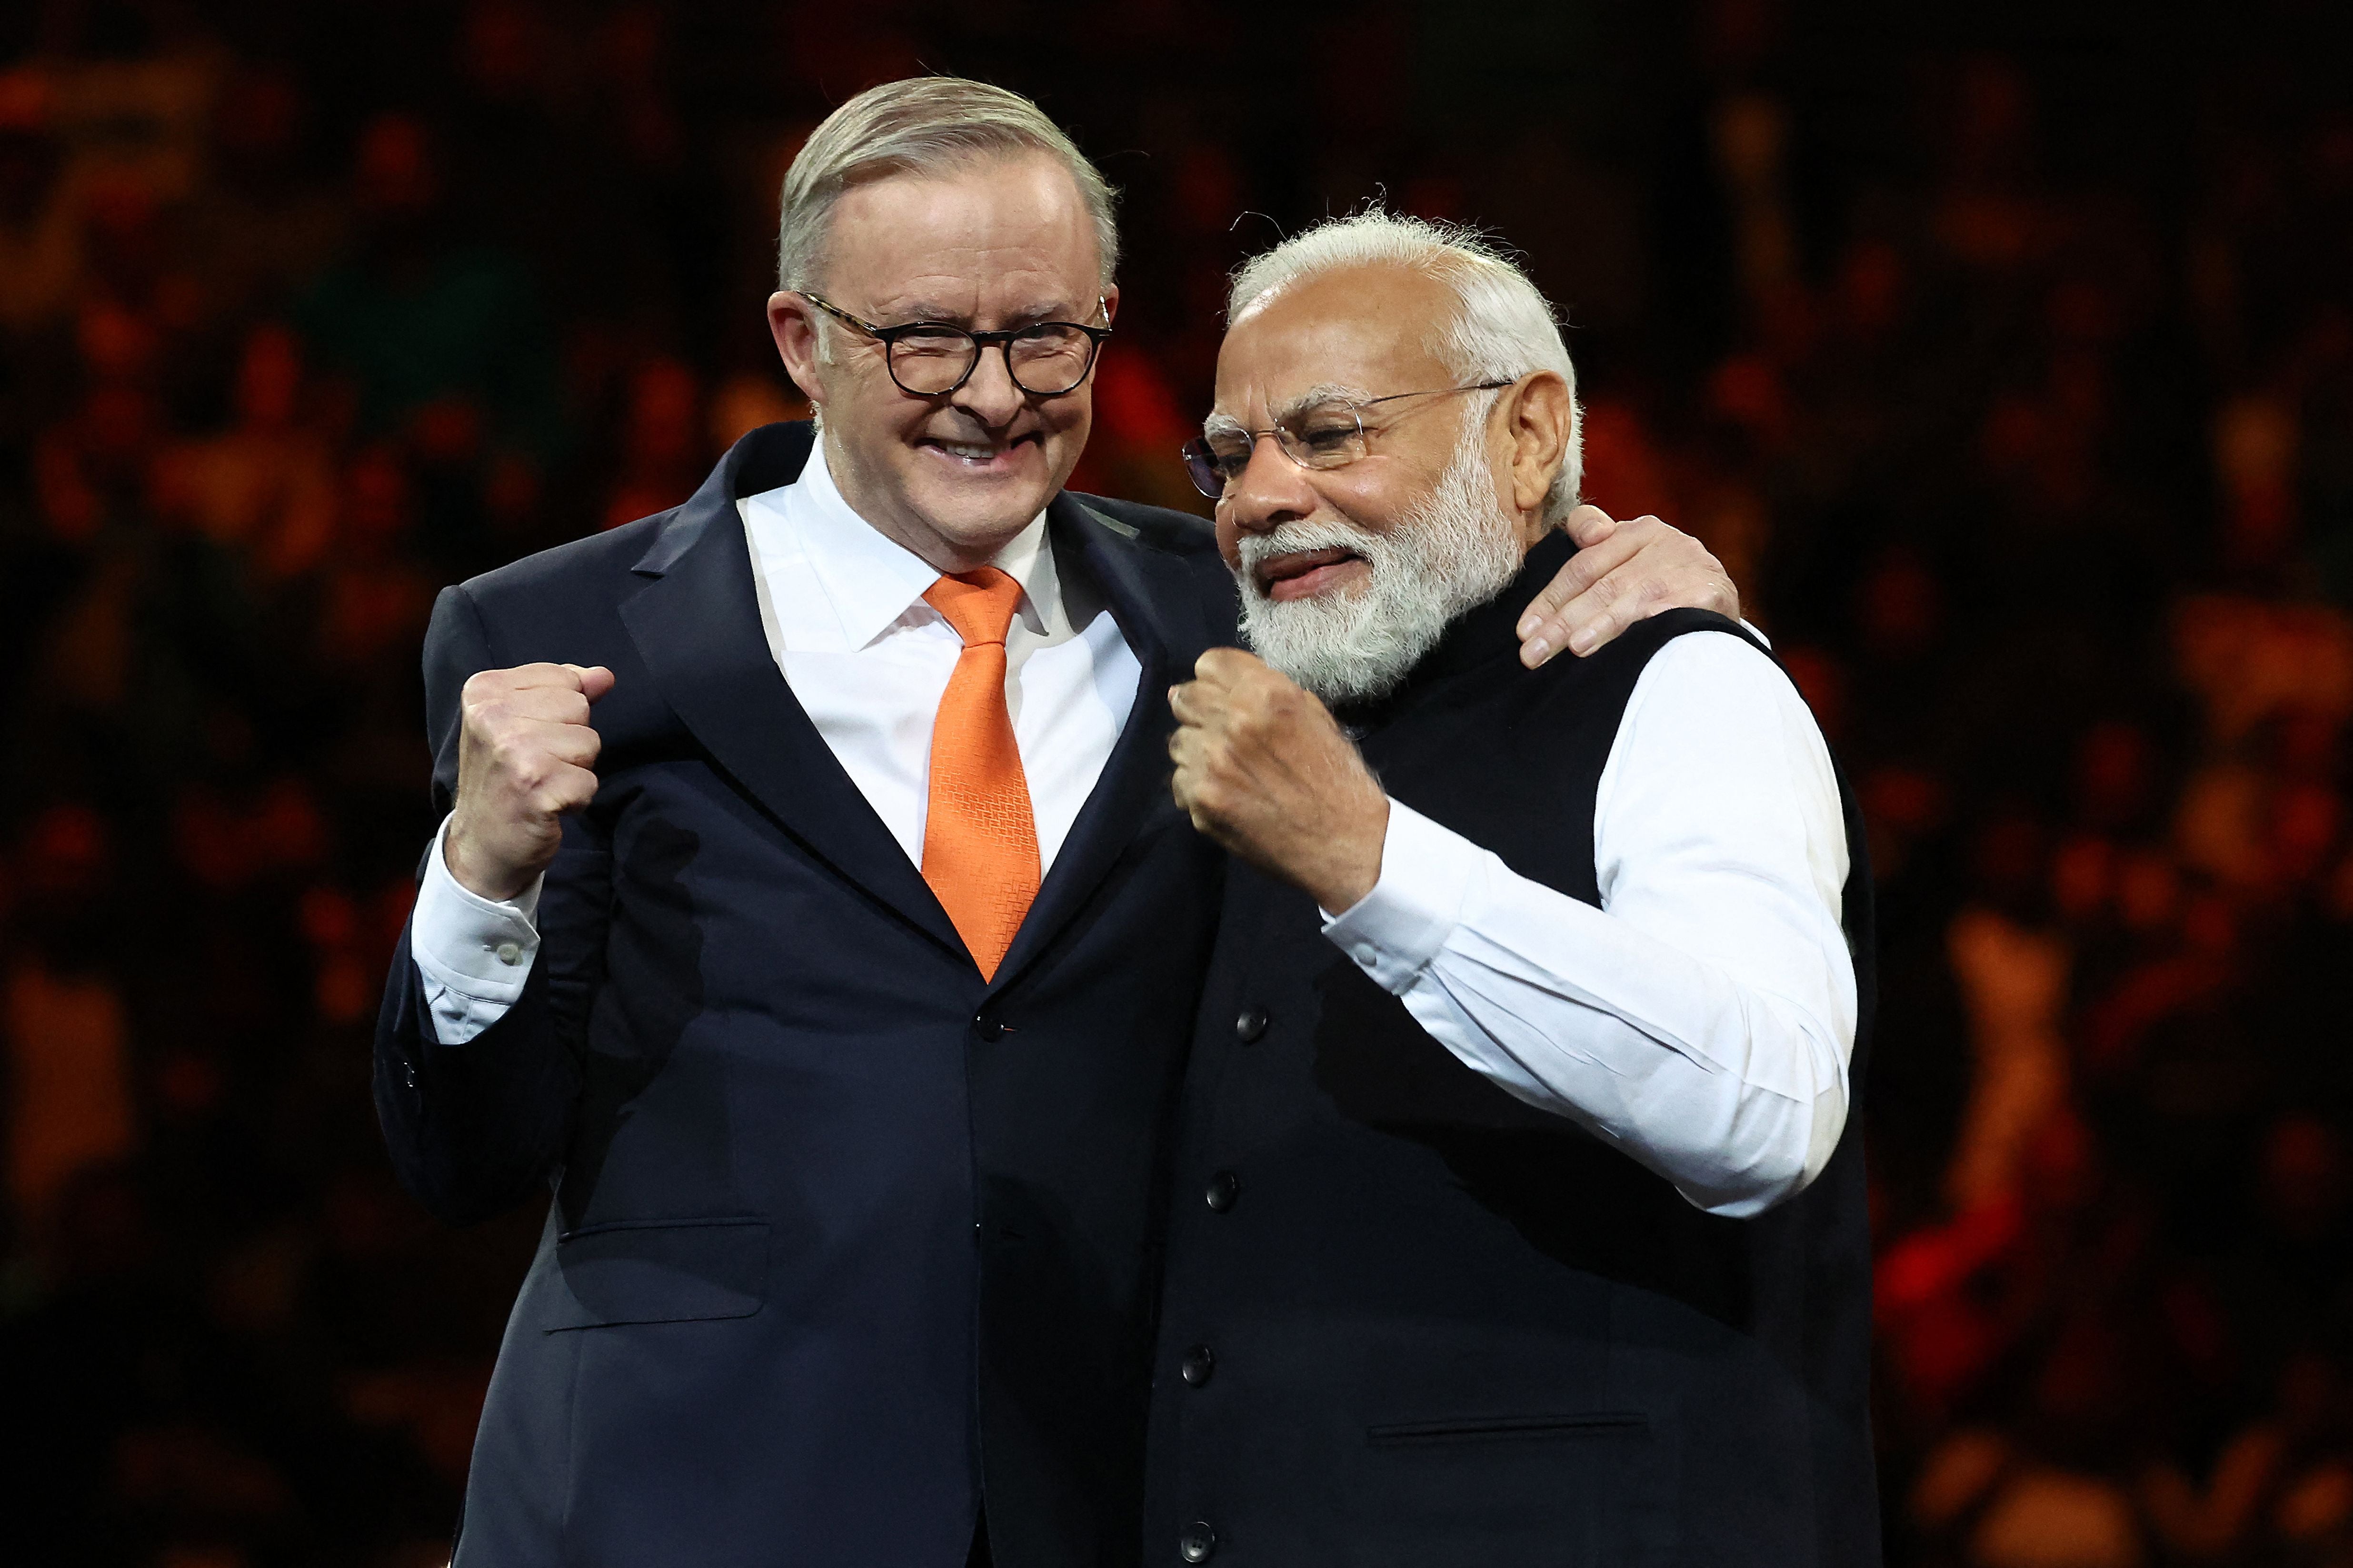 India’s prime minister Narendra Modi and Australia’s prime minister Anthony Albanese gesture during an event with members of the local Indian community at the Qudos Arena in Sydney